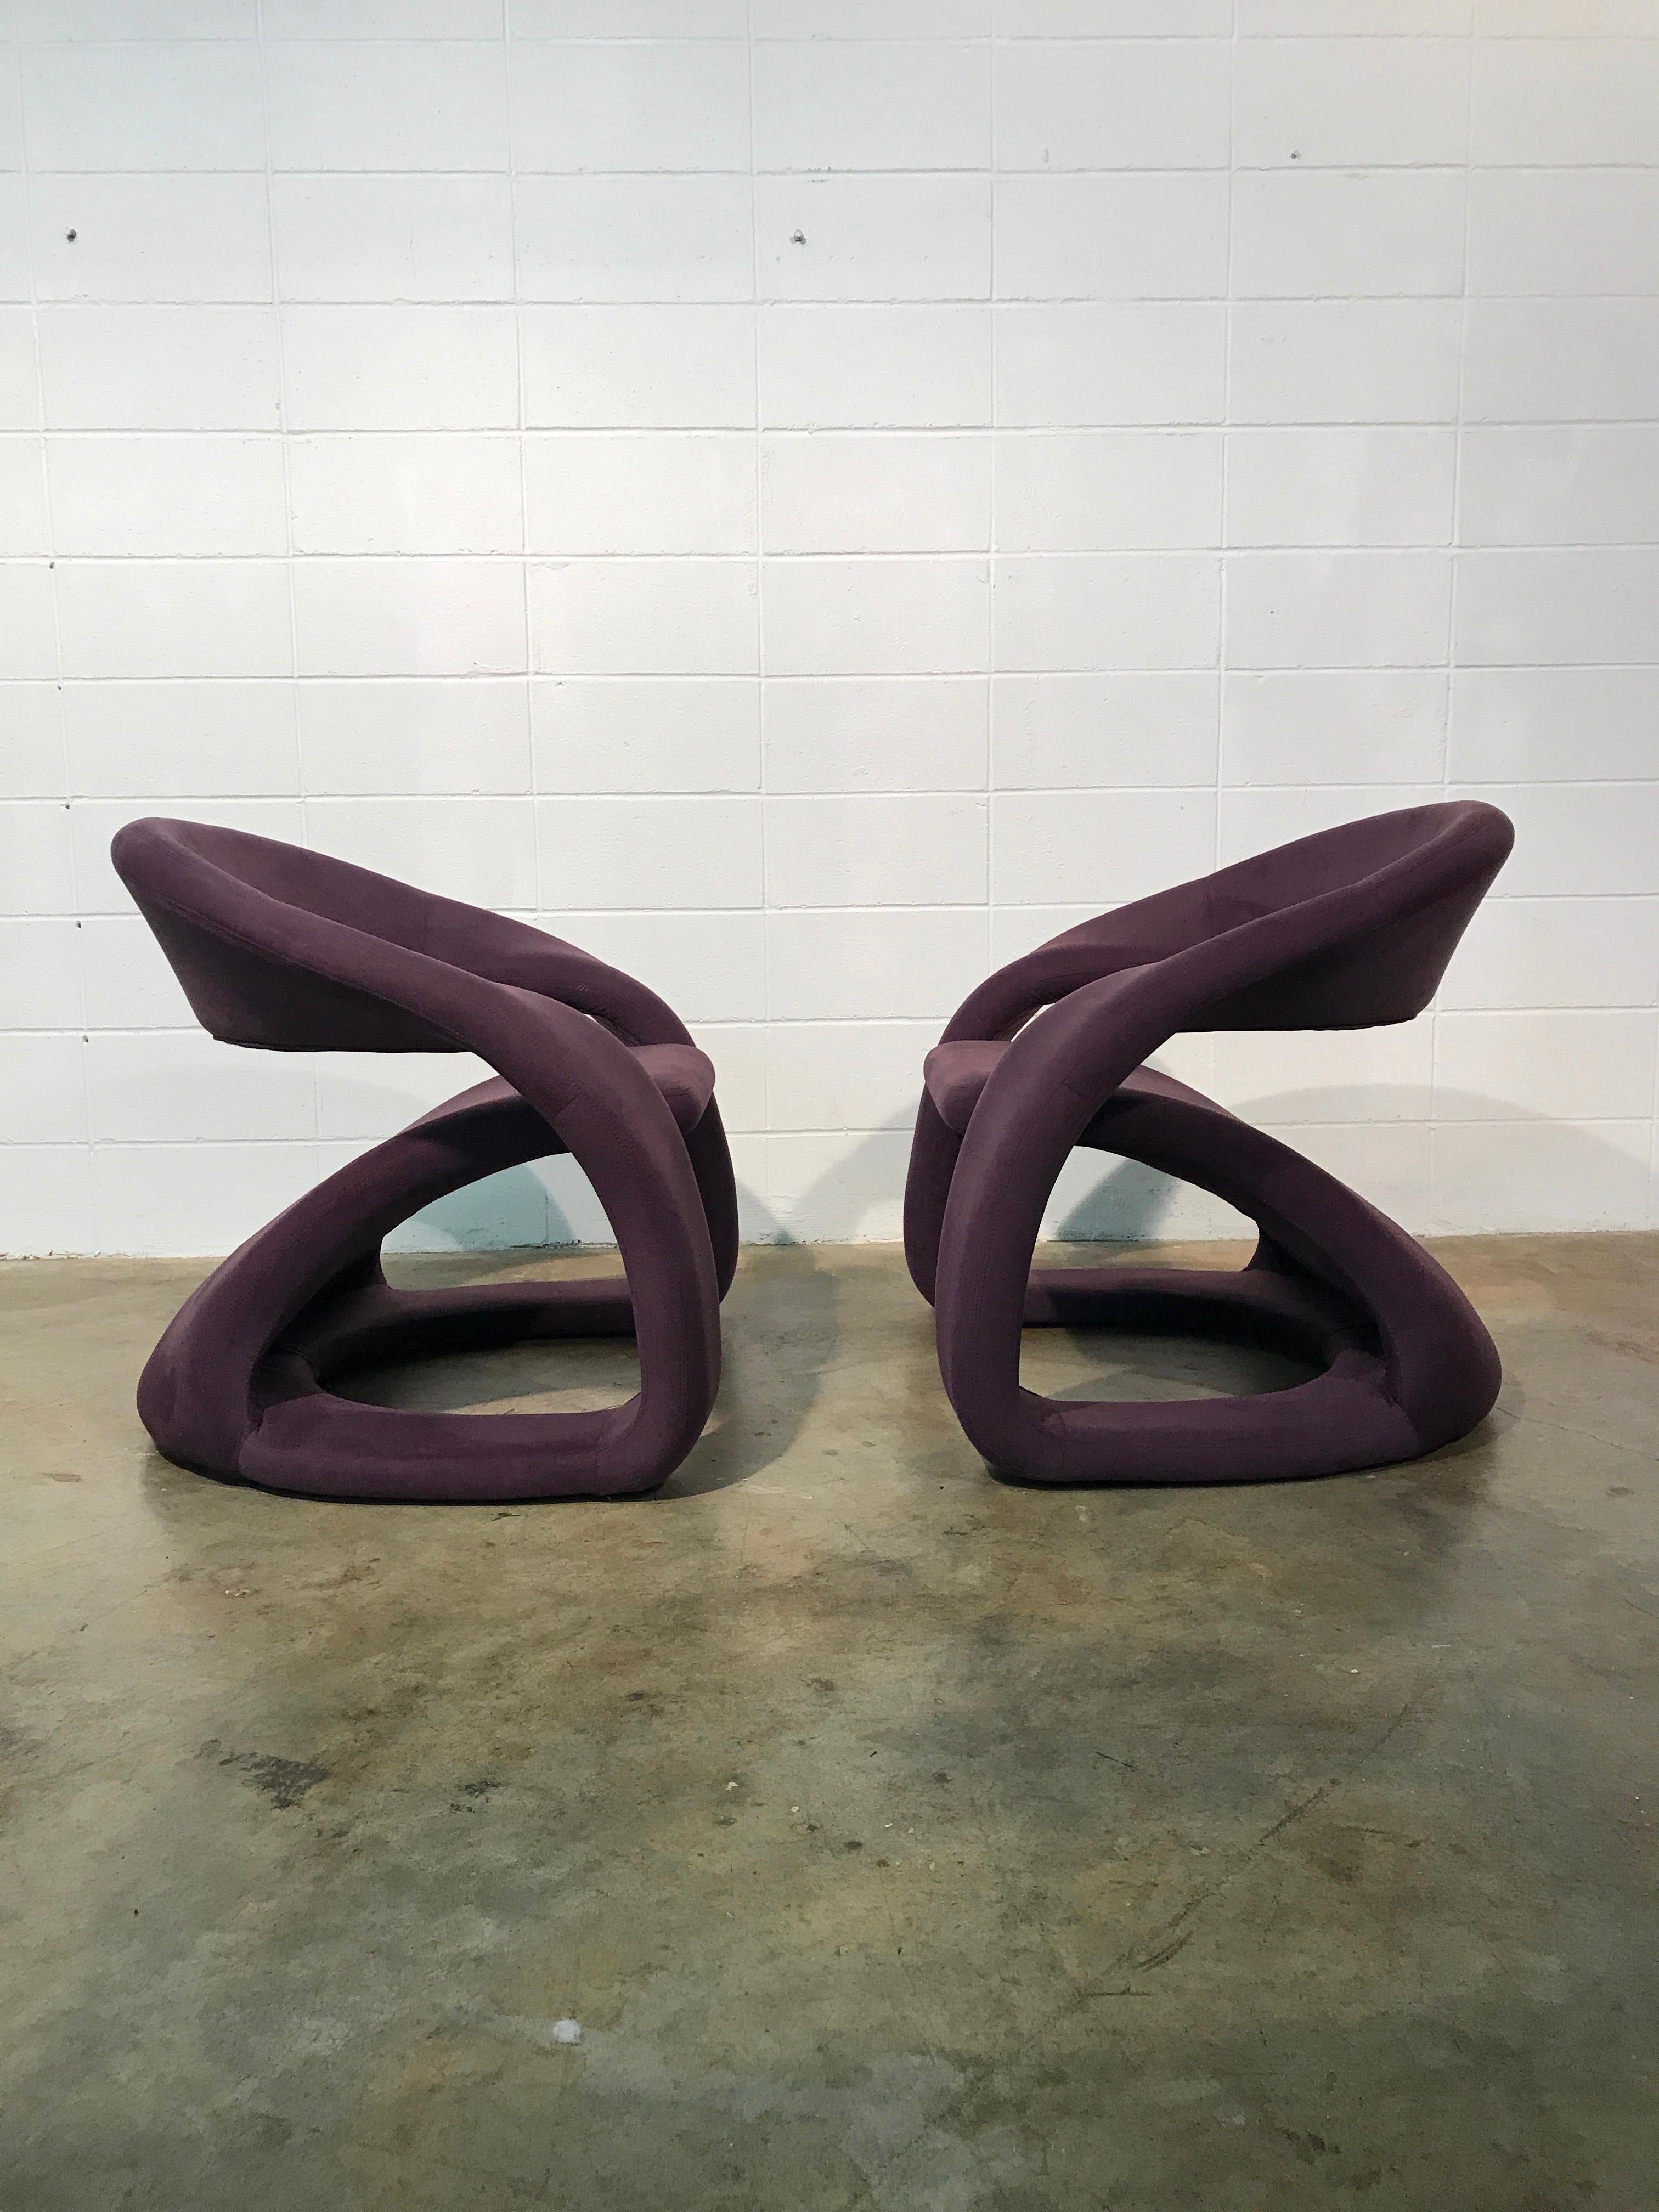 Pair of sculptural cantilever chairs with ottoman Memphis style.
Great pair of chairs with ottomans in original purple fabric. Overall in great condition with only a few very minimal knicks in the fabric that isn’t noticeable. Does not detract from